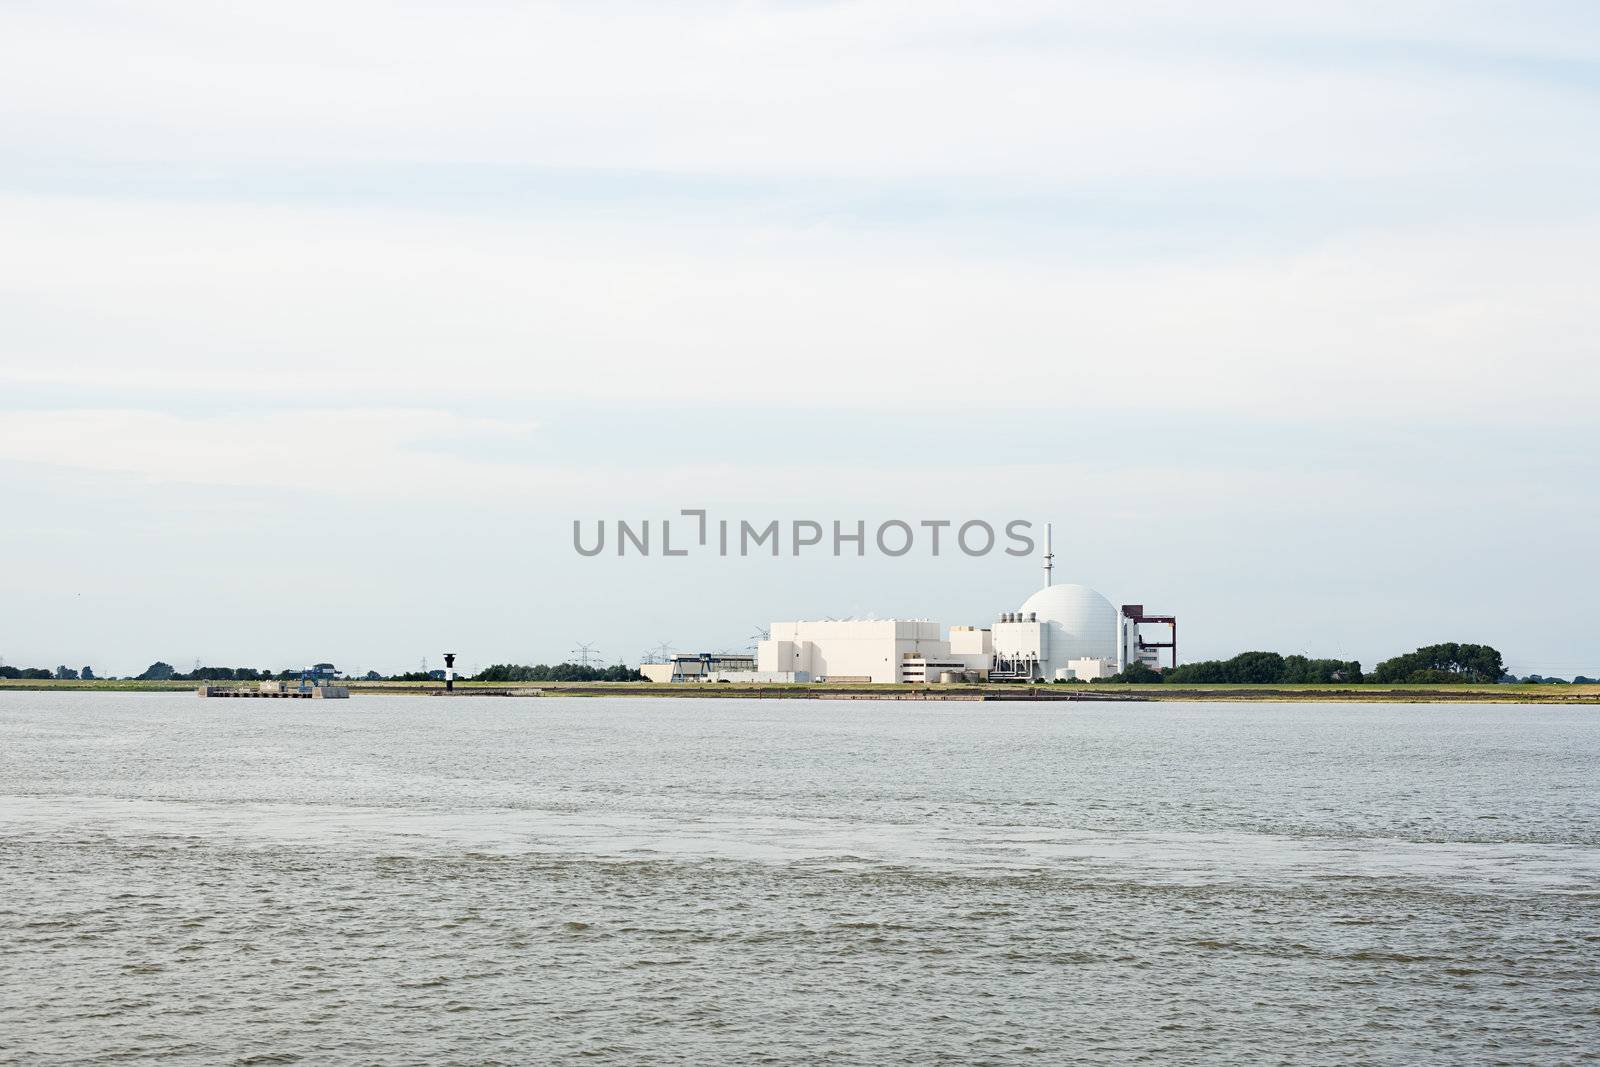 Nuclear plant near river by imarin